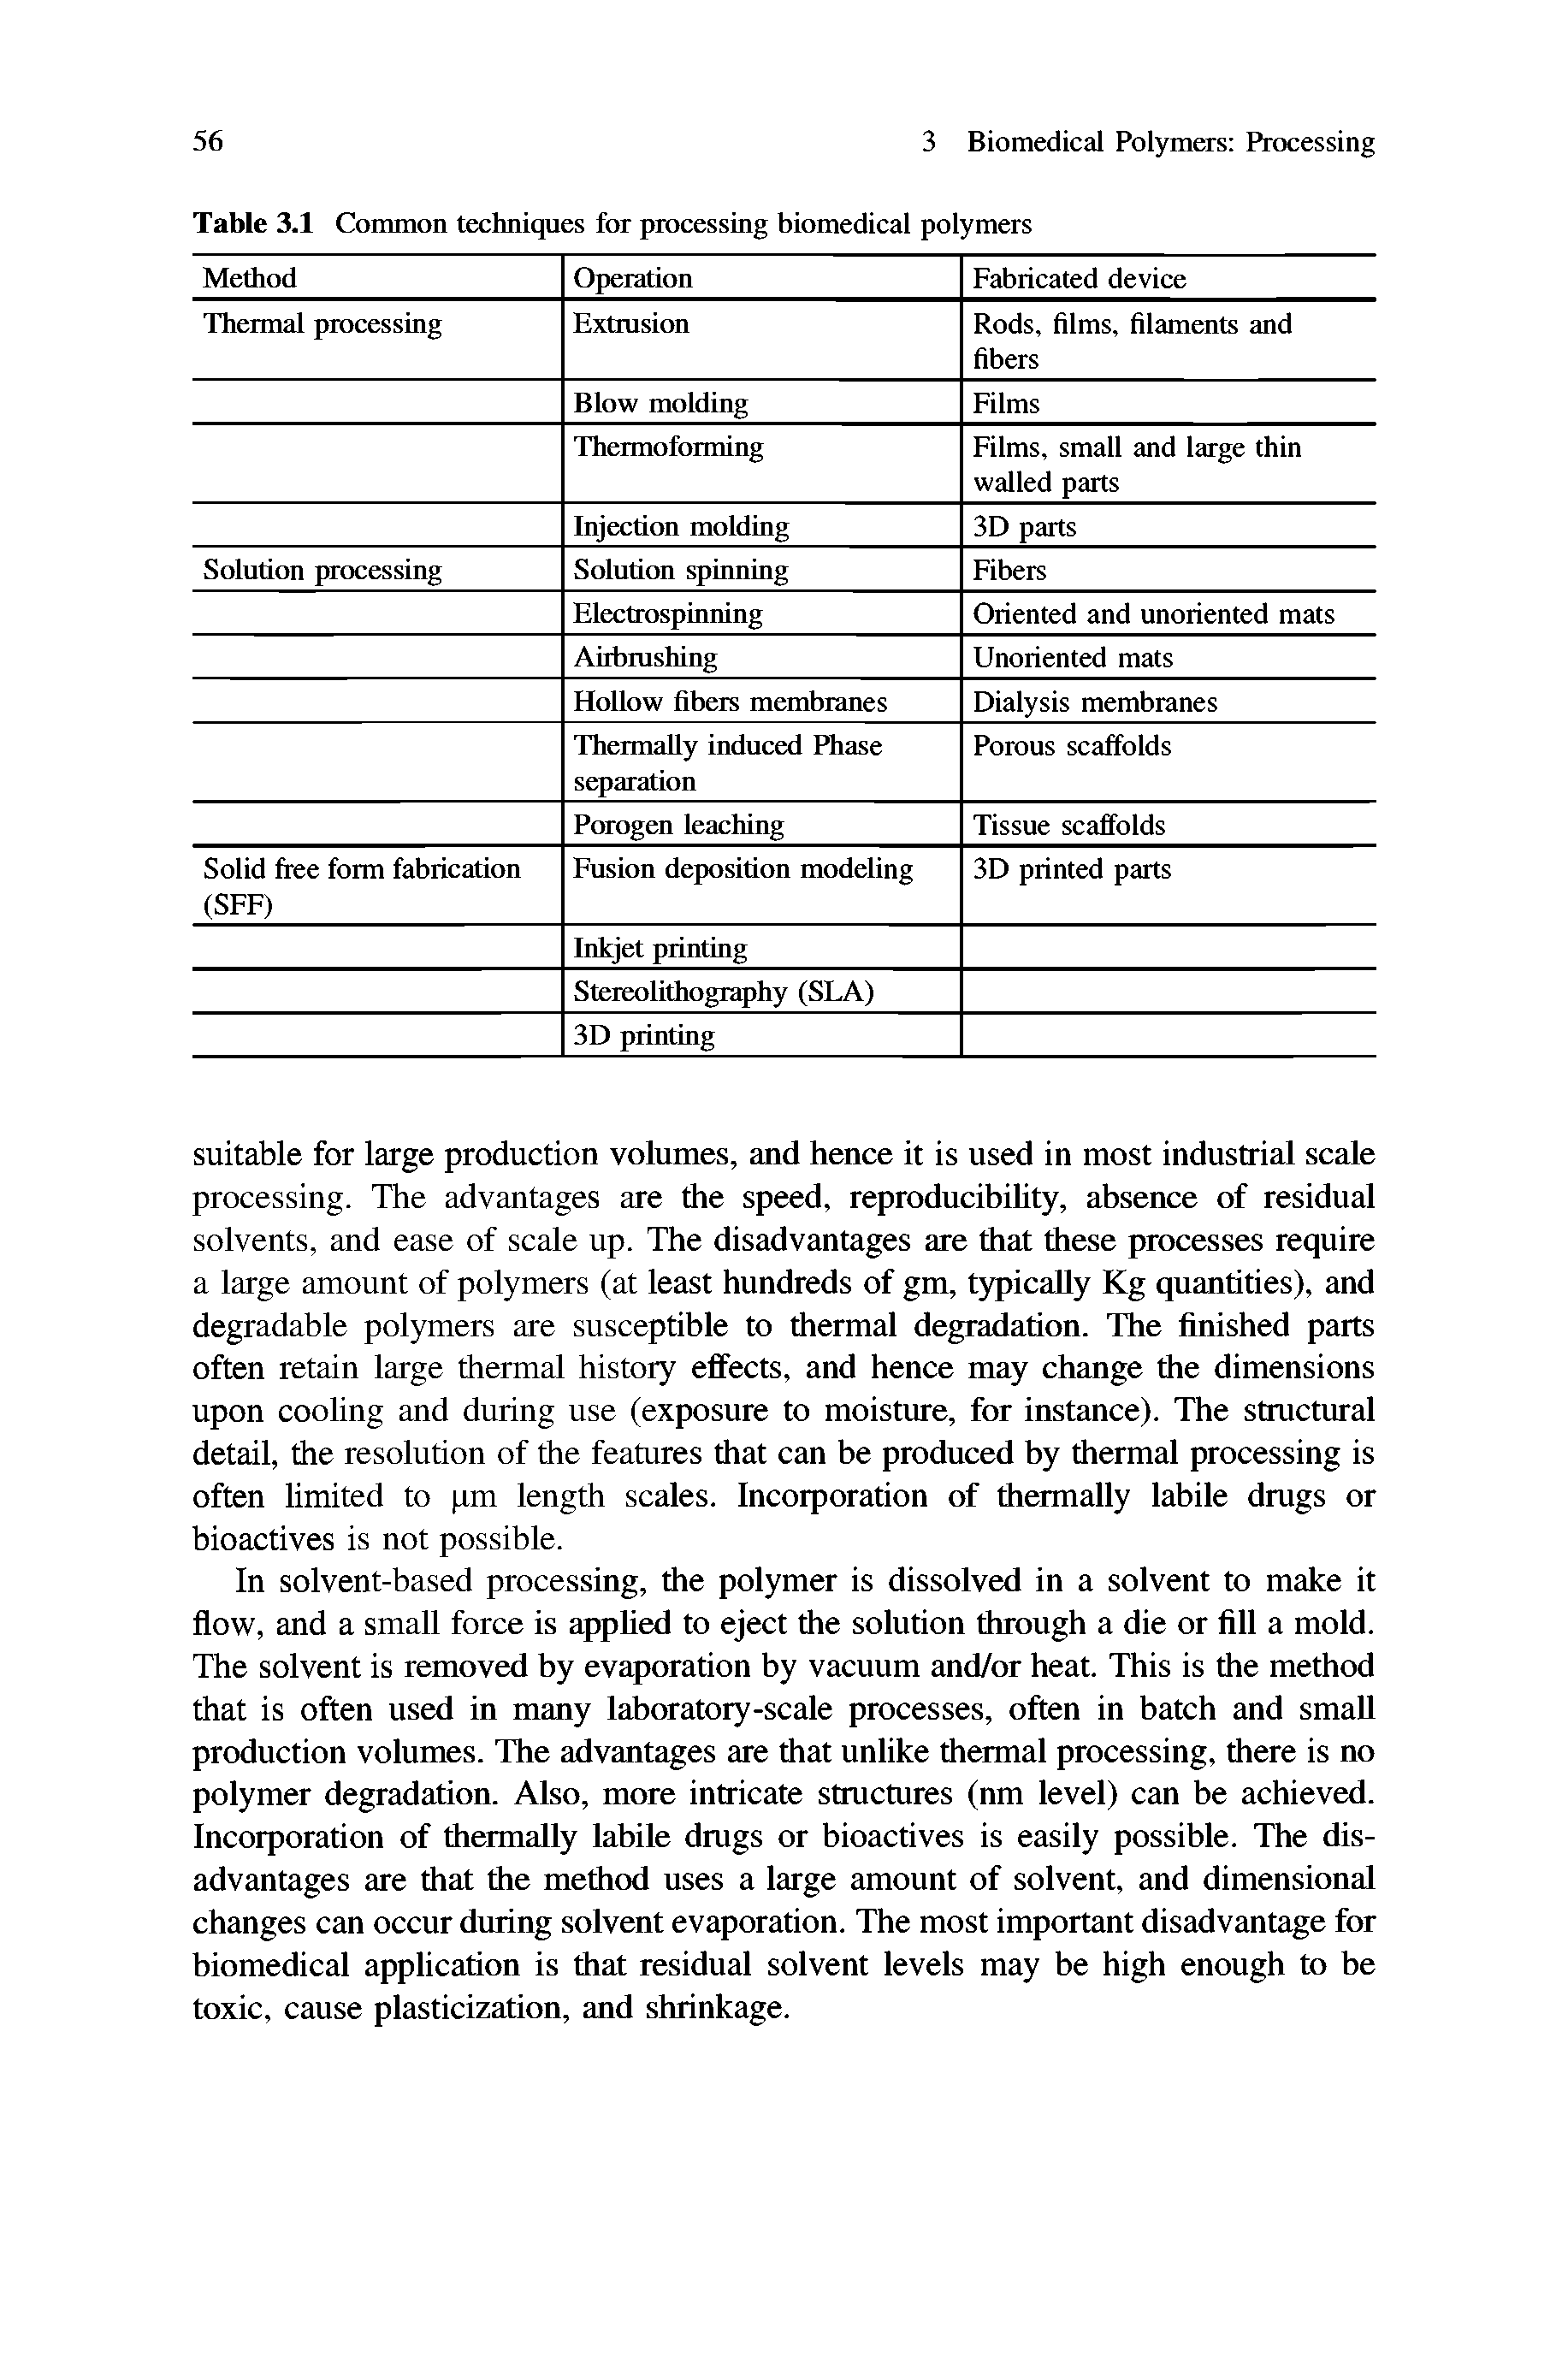 Table 3.1 Common techniques for processing biomedical polymers...